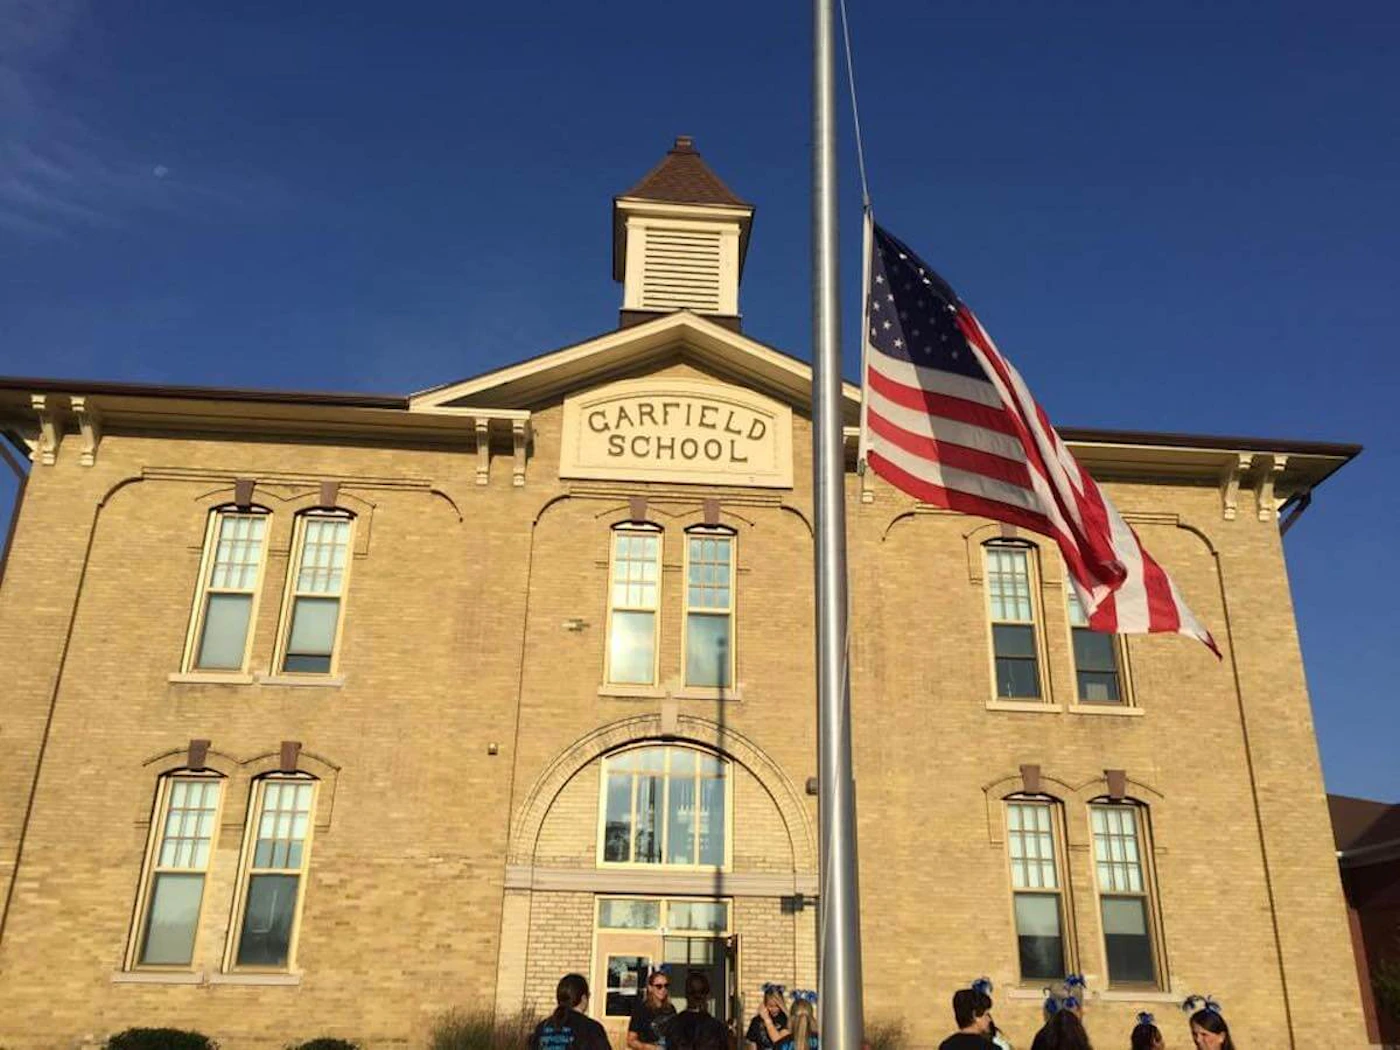 Julian Thomas Elementary School in Racine, built in the 1850s as Garfield School, will receive updates as part of the $1 billion referendum district voters passed in spring 2020. (Photo via Julian Thomas Elementary/Facebook)